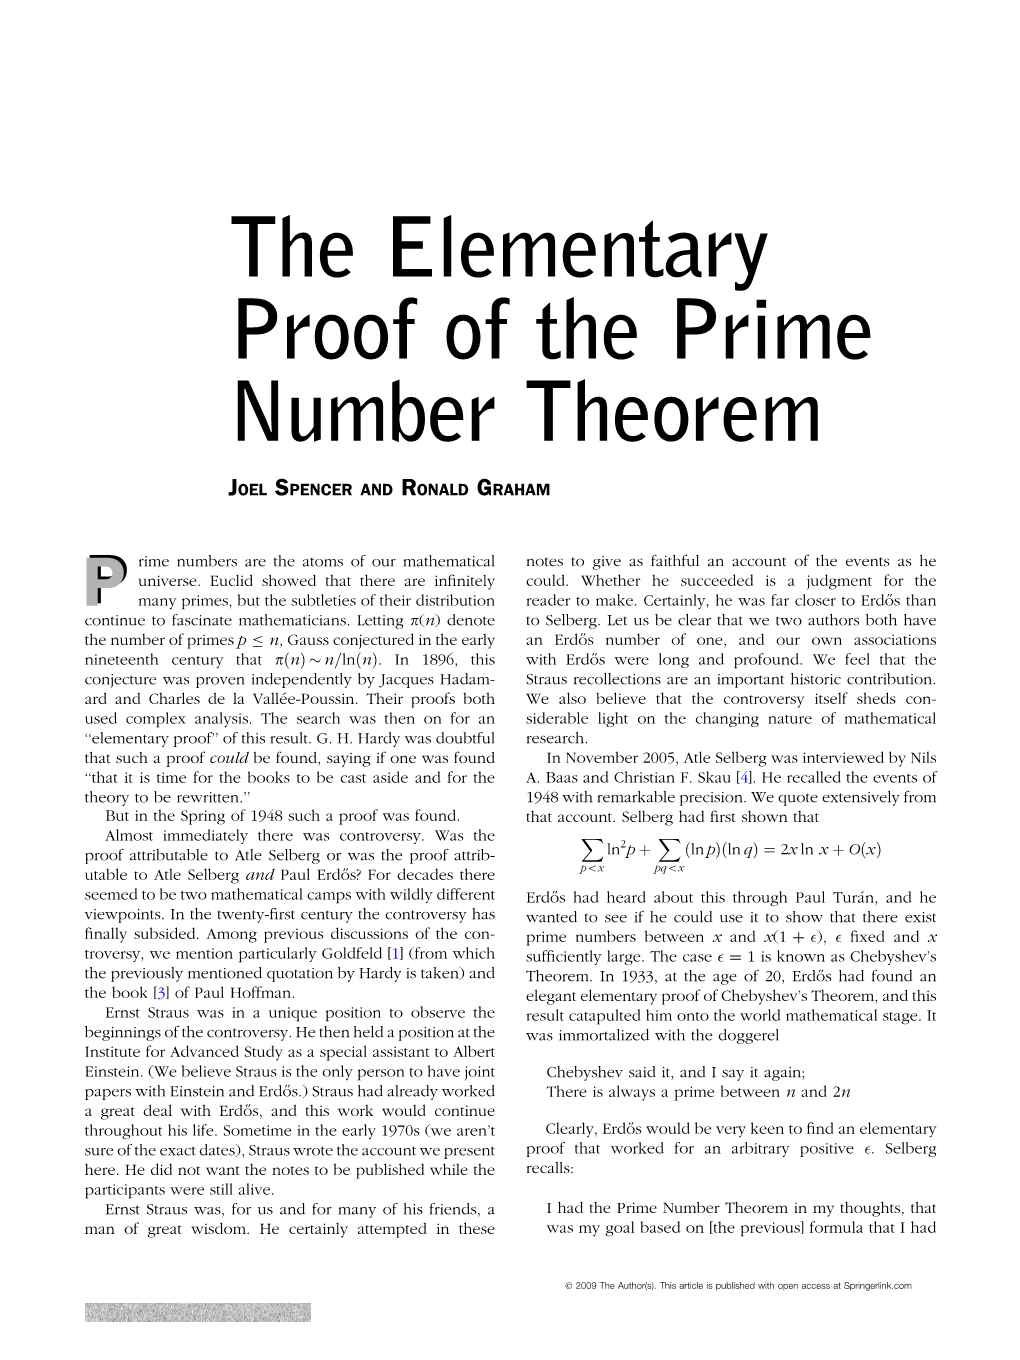 The Elementary Proof of the Prime Number Theorem